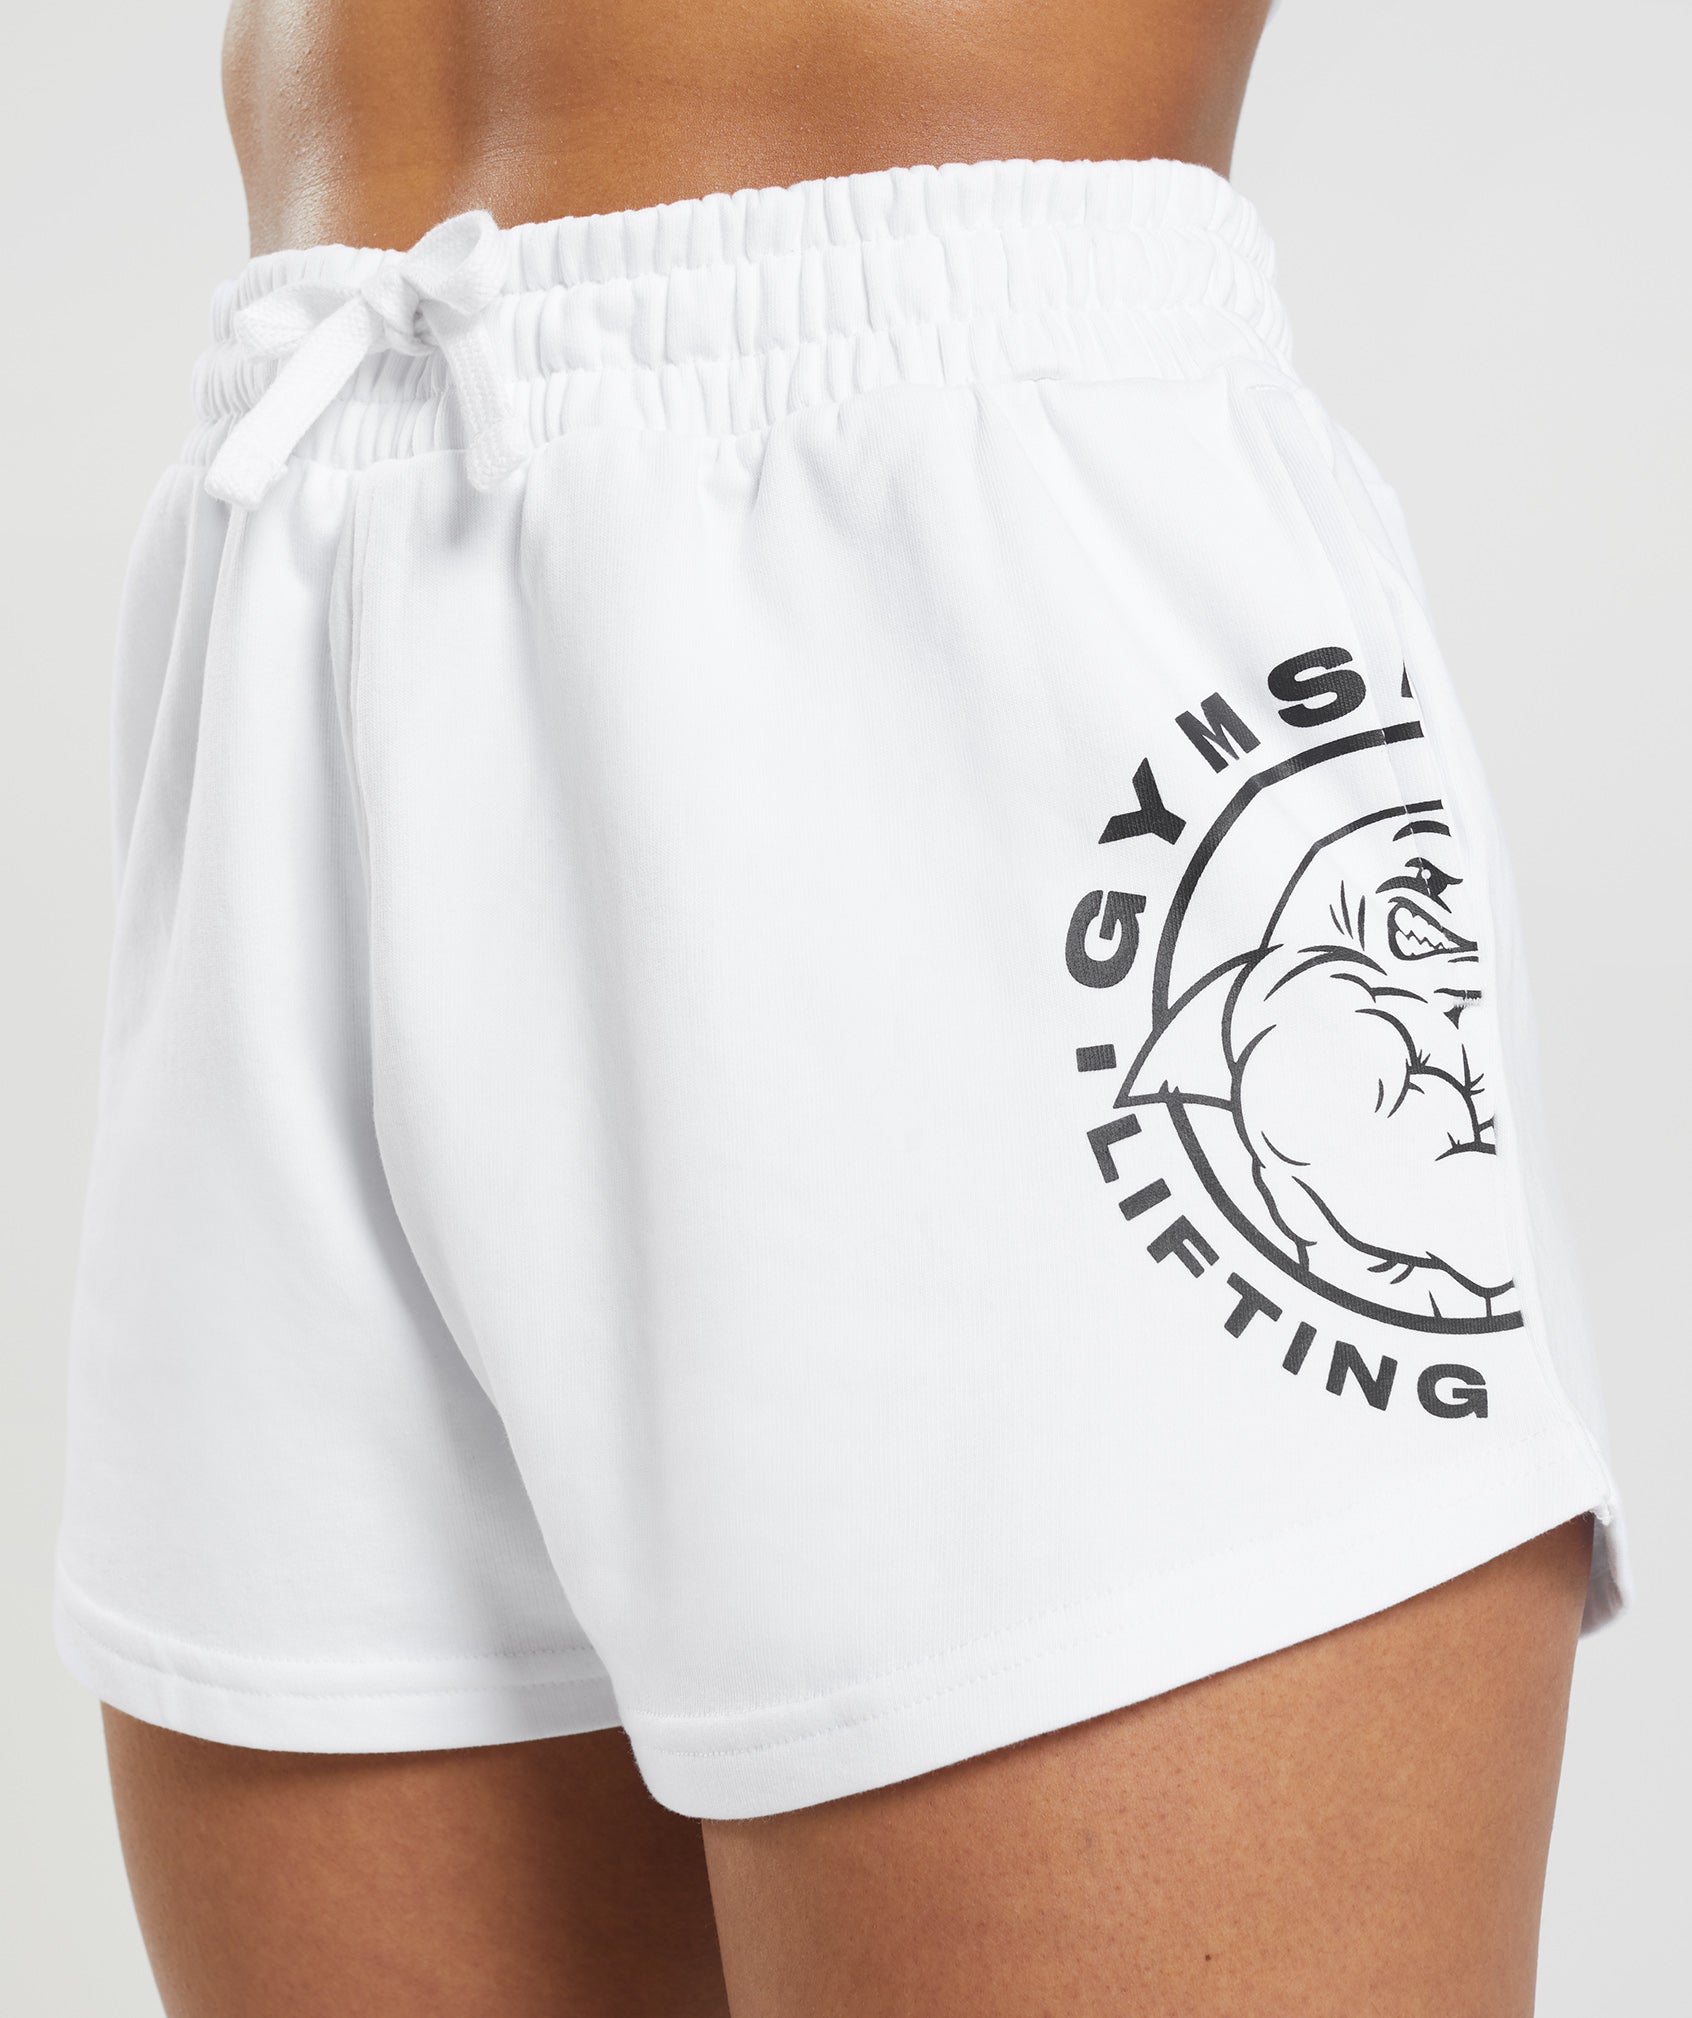 Legacy Shorts in White - view 3